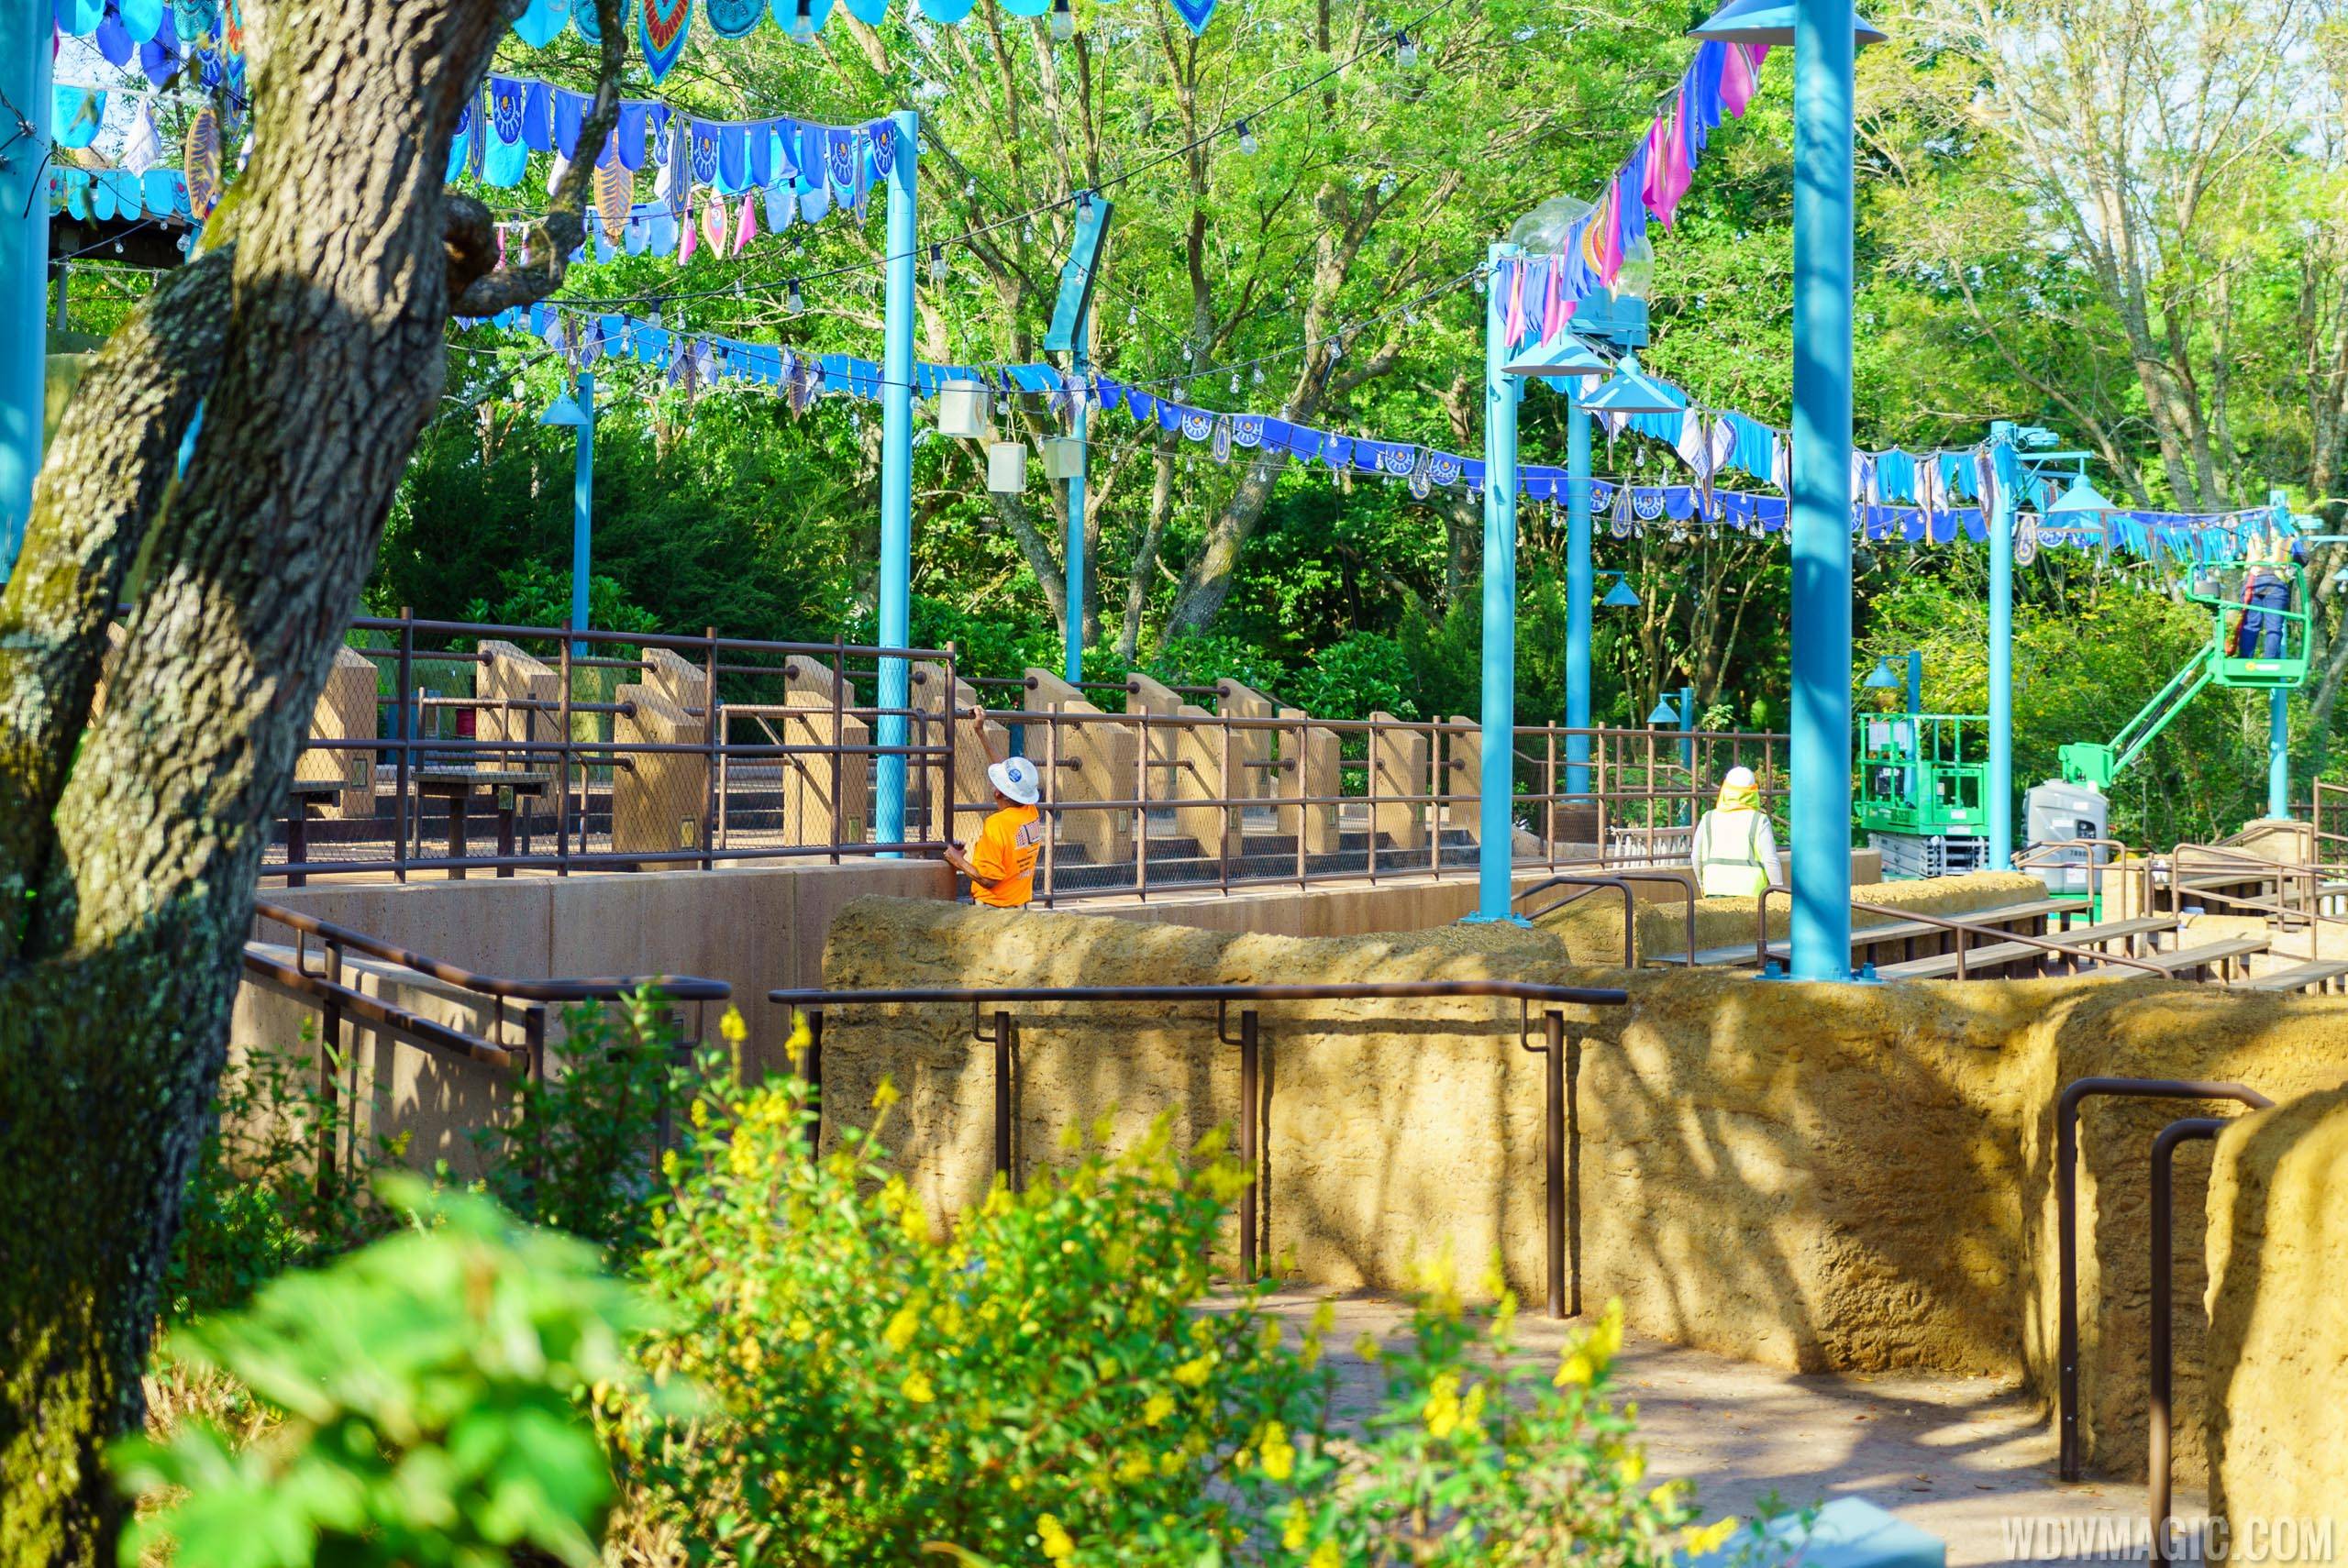 Rivers of Light viewing areas completed